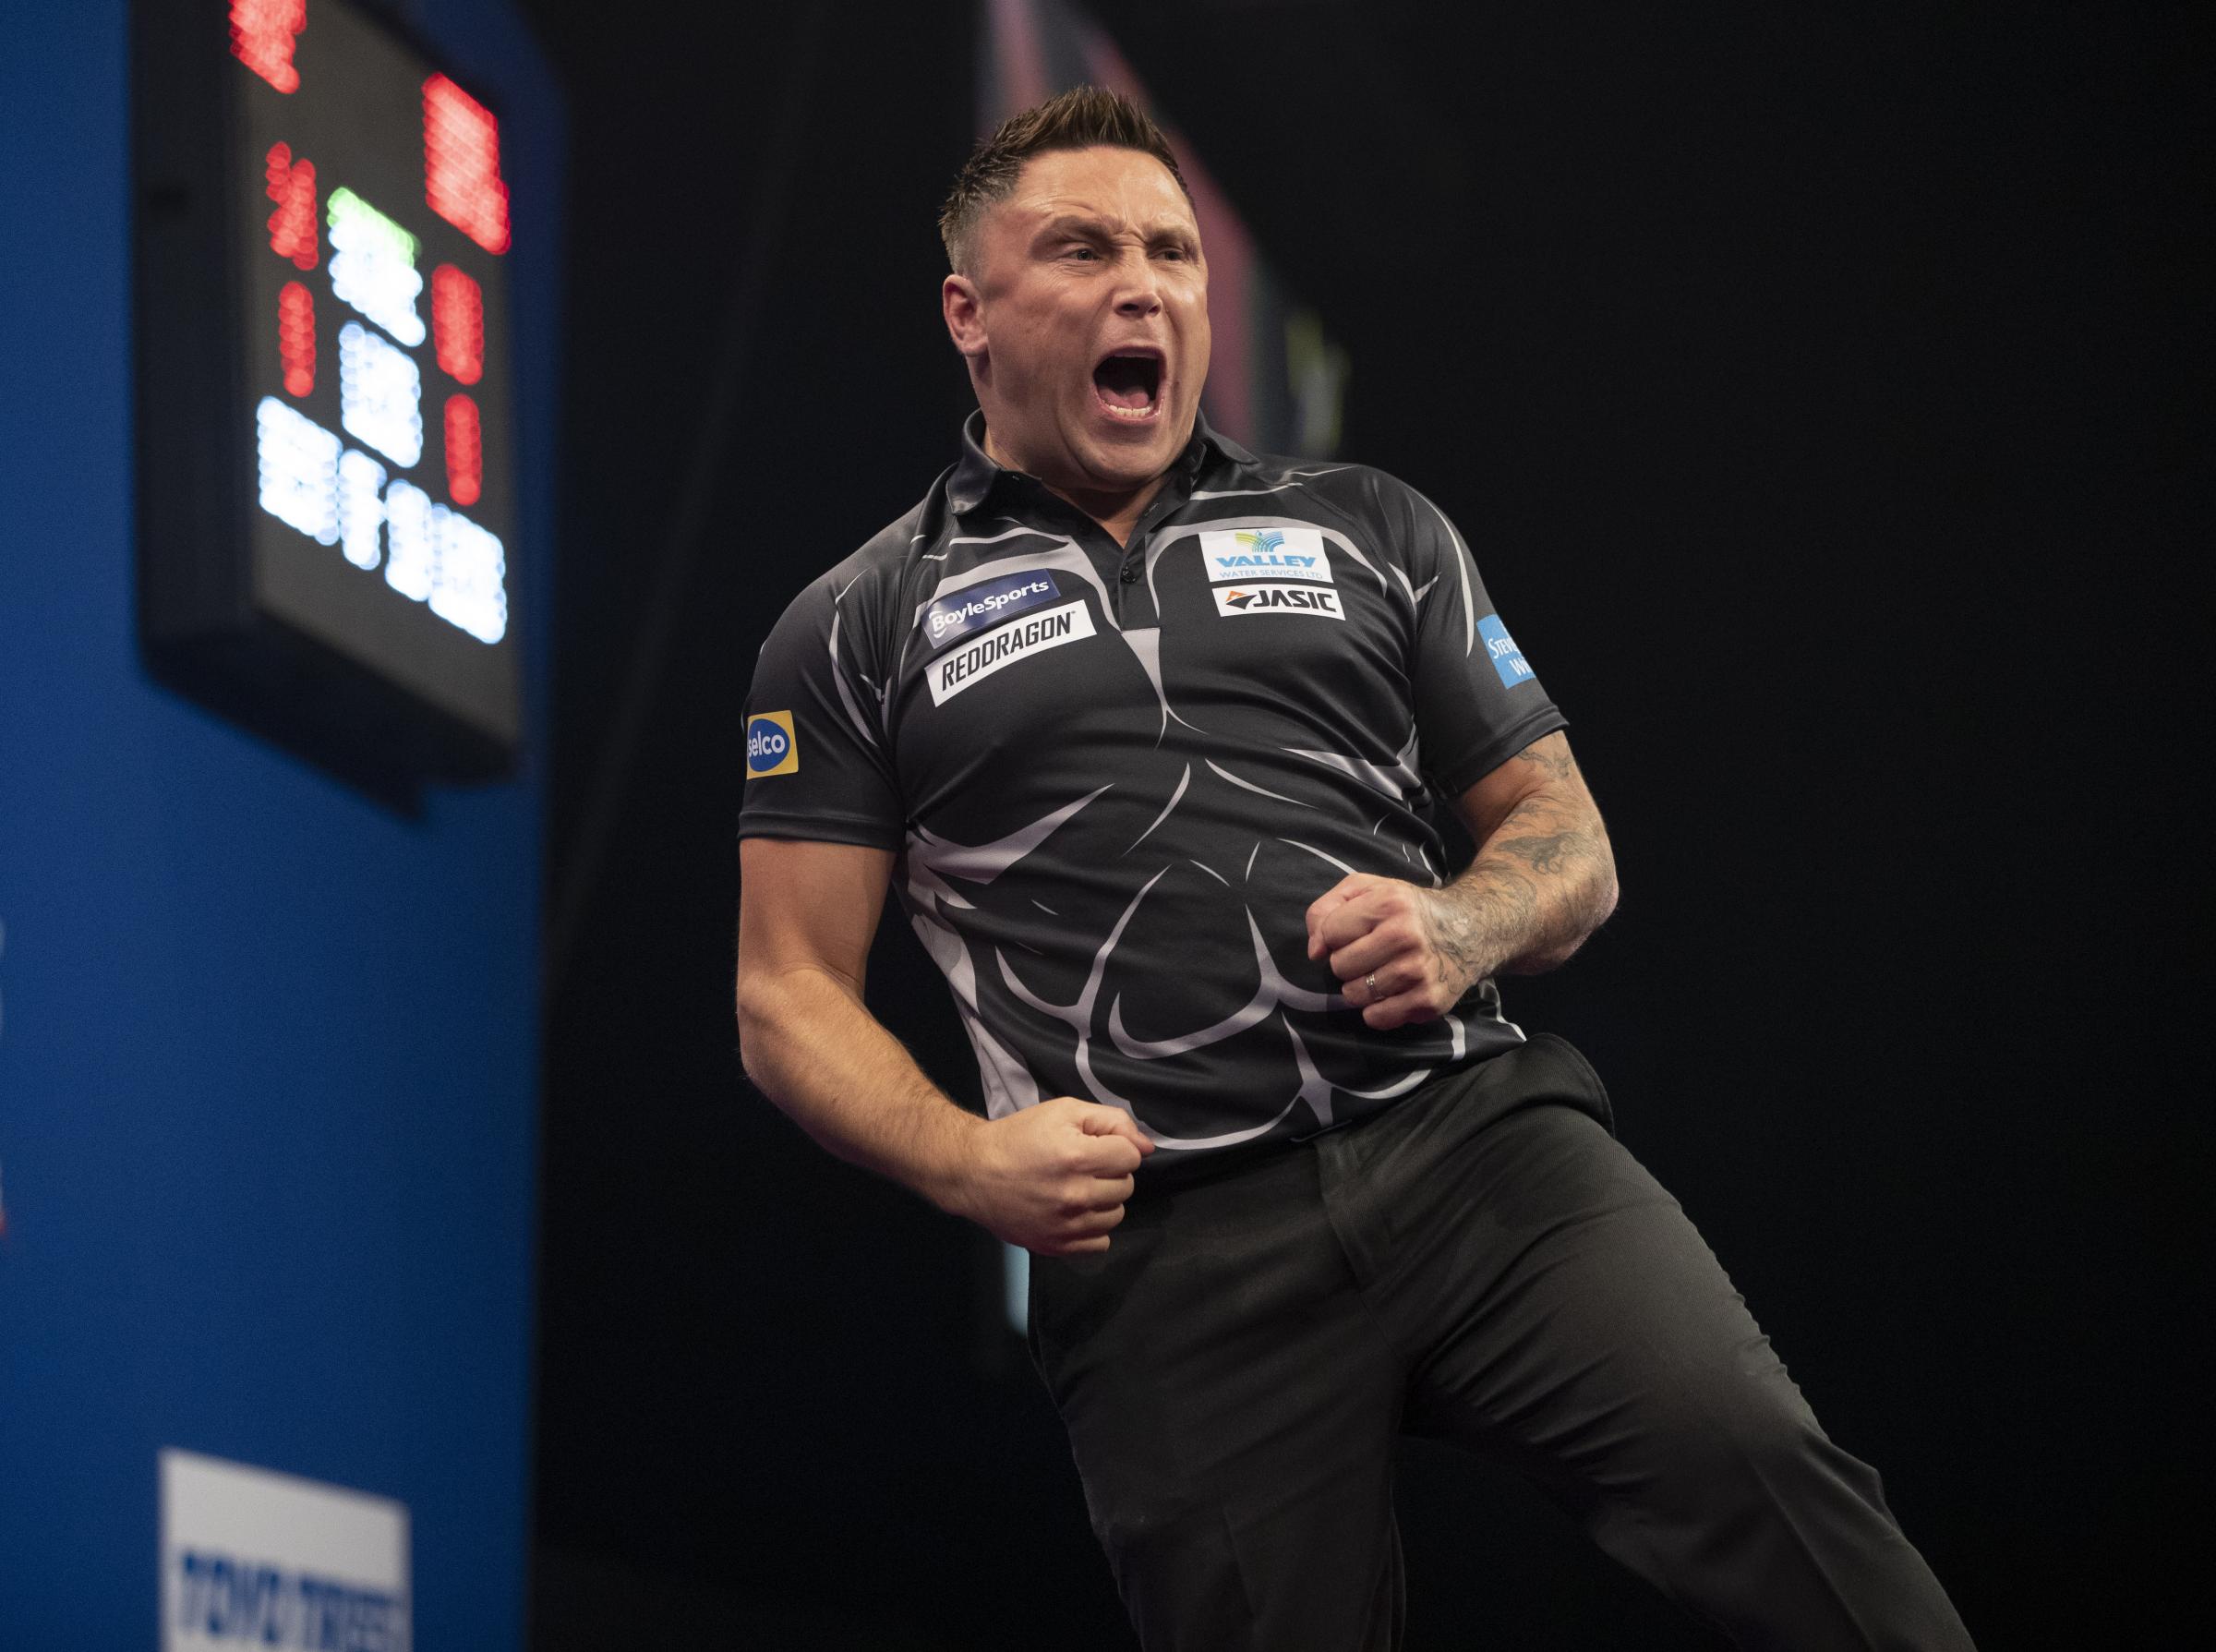 Darts Ace Gerwyn Price To Face William O Connor Or Marko Kantele In Pdc World Championship Opener South Wales Argus